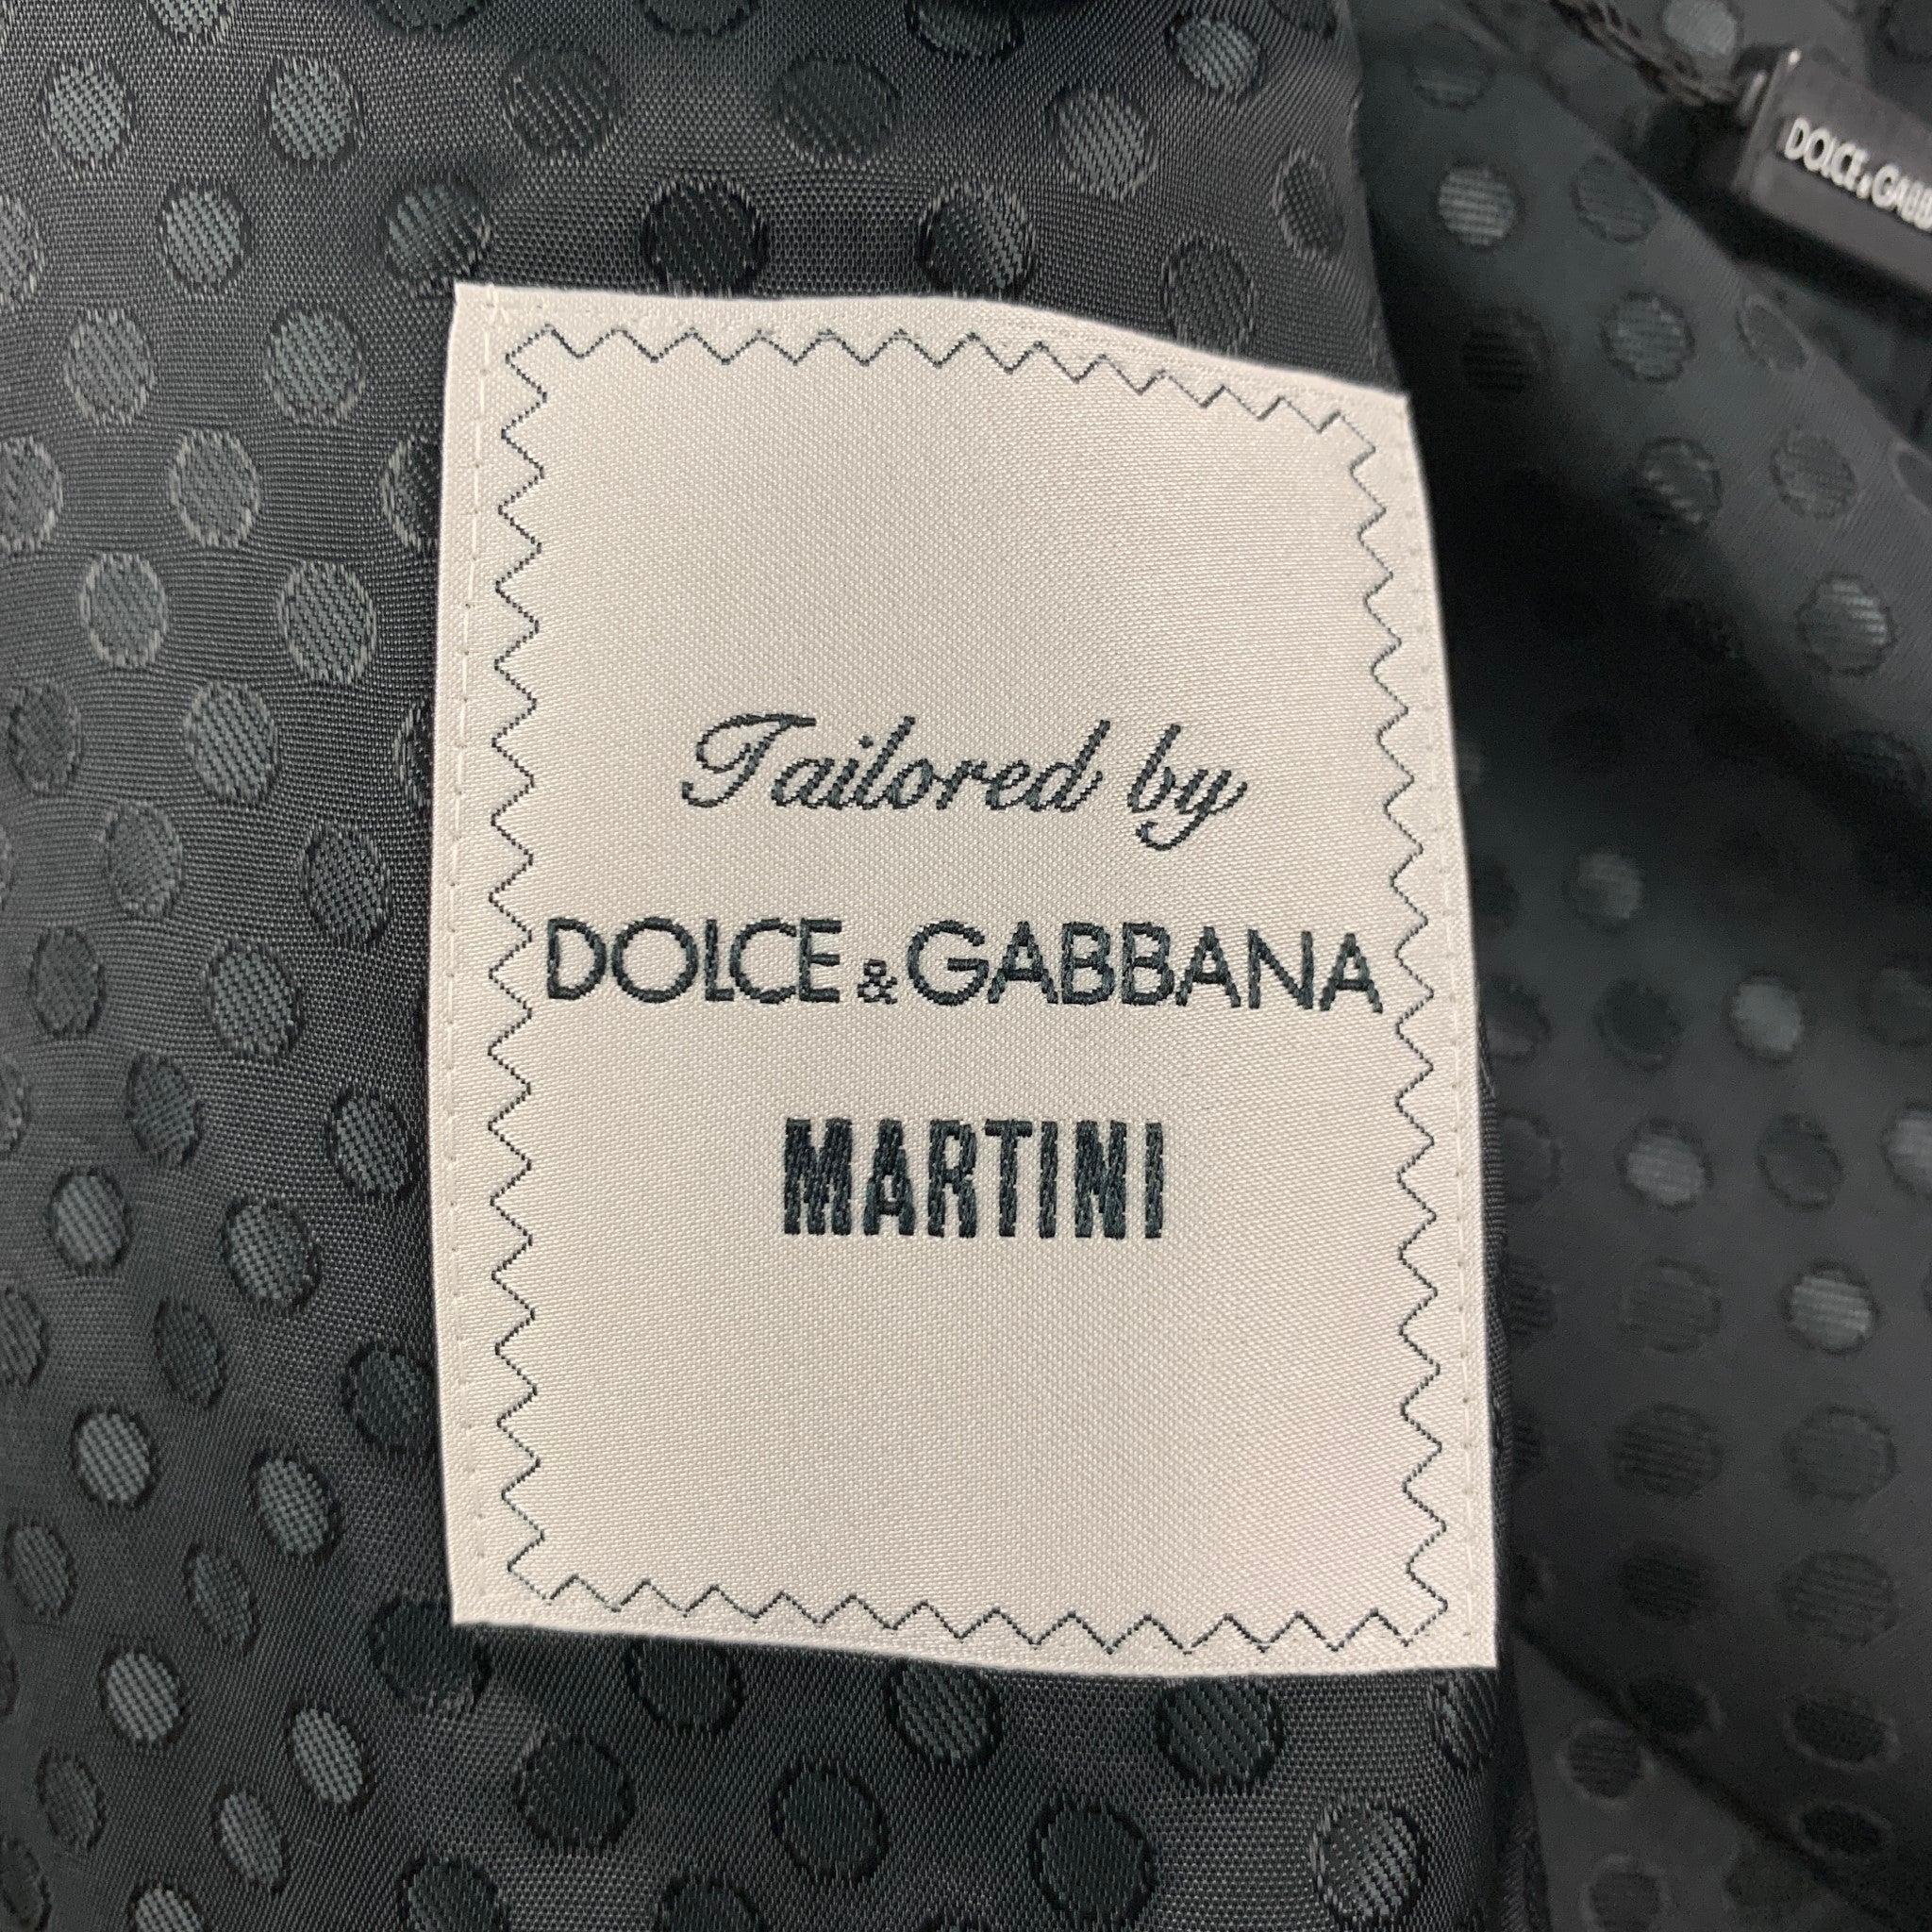 DOLCE & GABBANA Martini Size 42 Wool Double Breasted Crystal Accent 3 Piece Suit For Sale 4